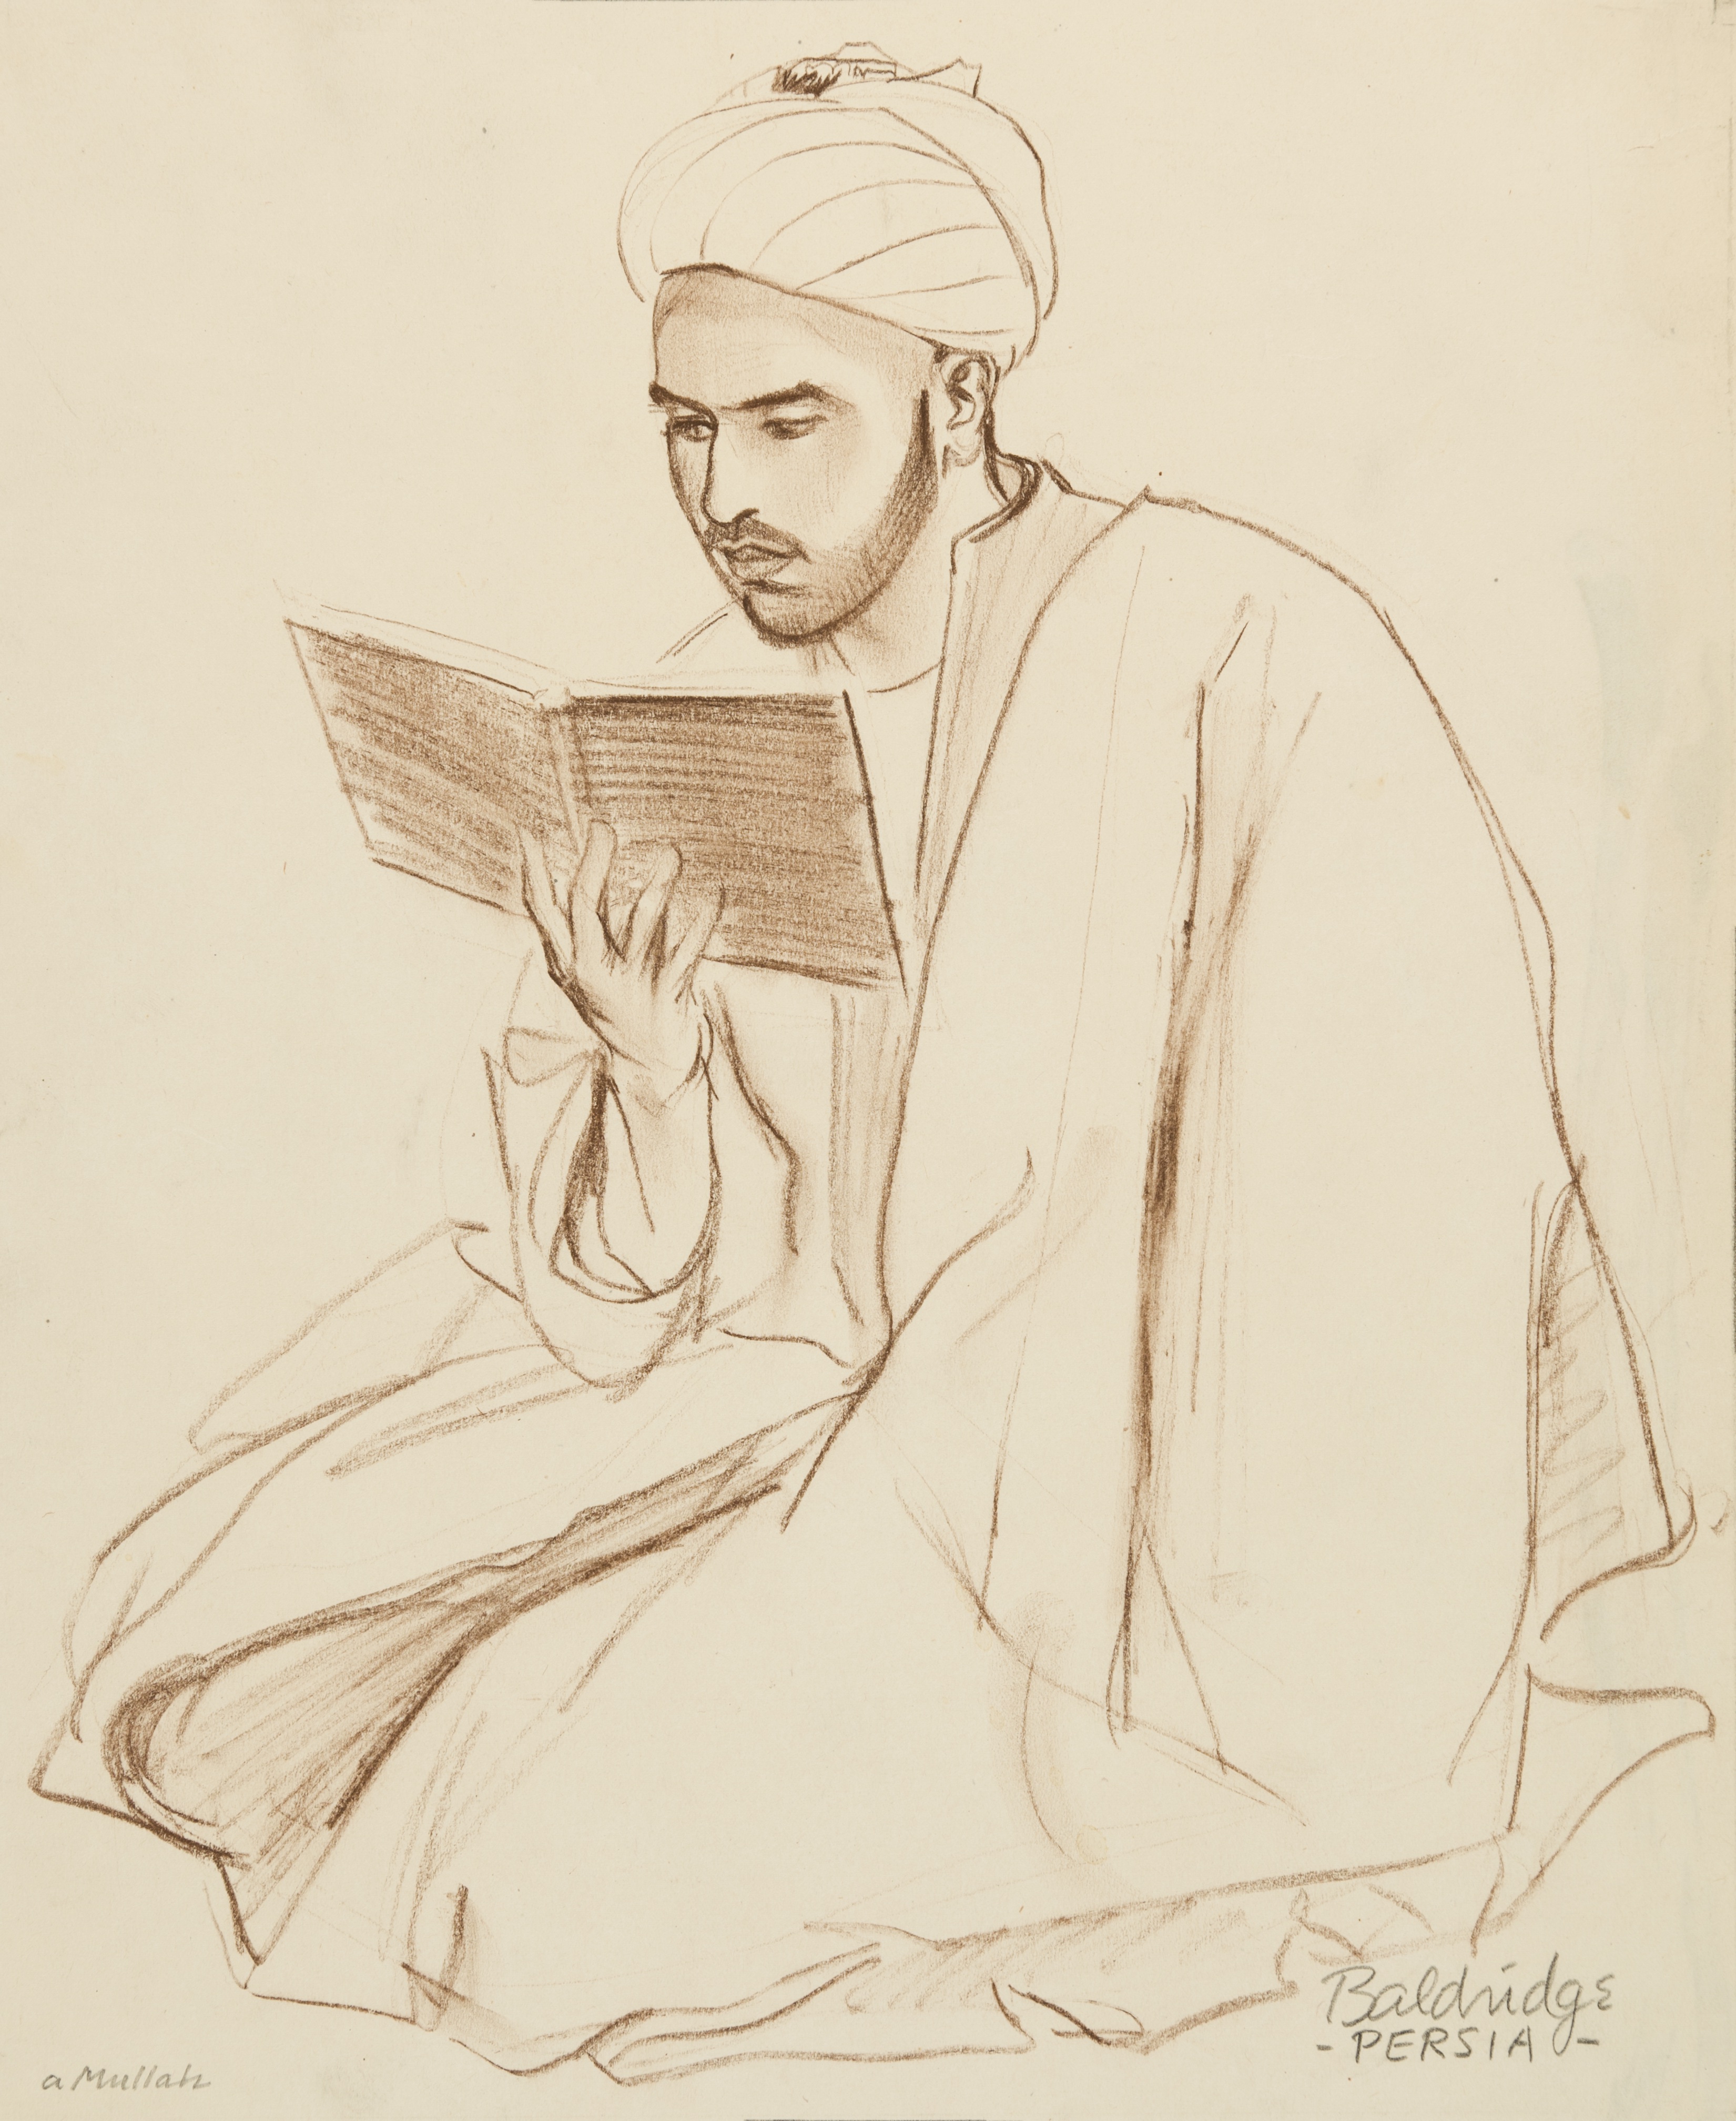 Cyrus Leroy Baldridge, American, 1889-1977 A Mullah Not dated  Brown charcoal on paper 13 x 11 inches